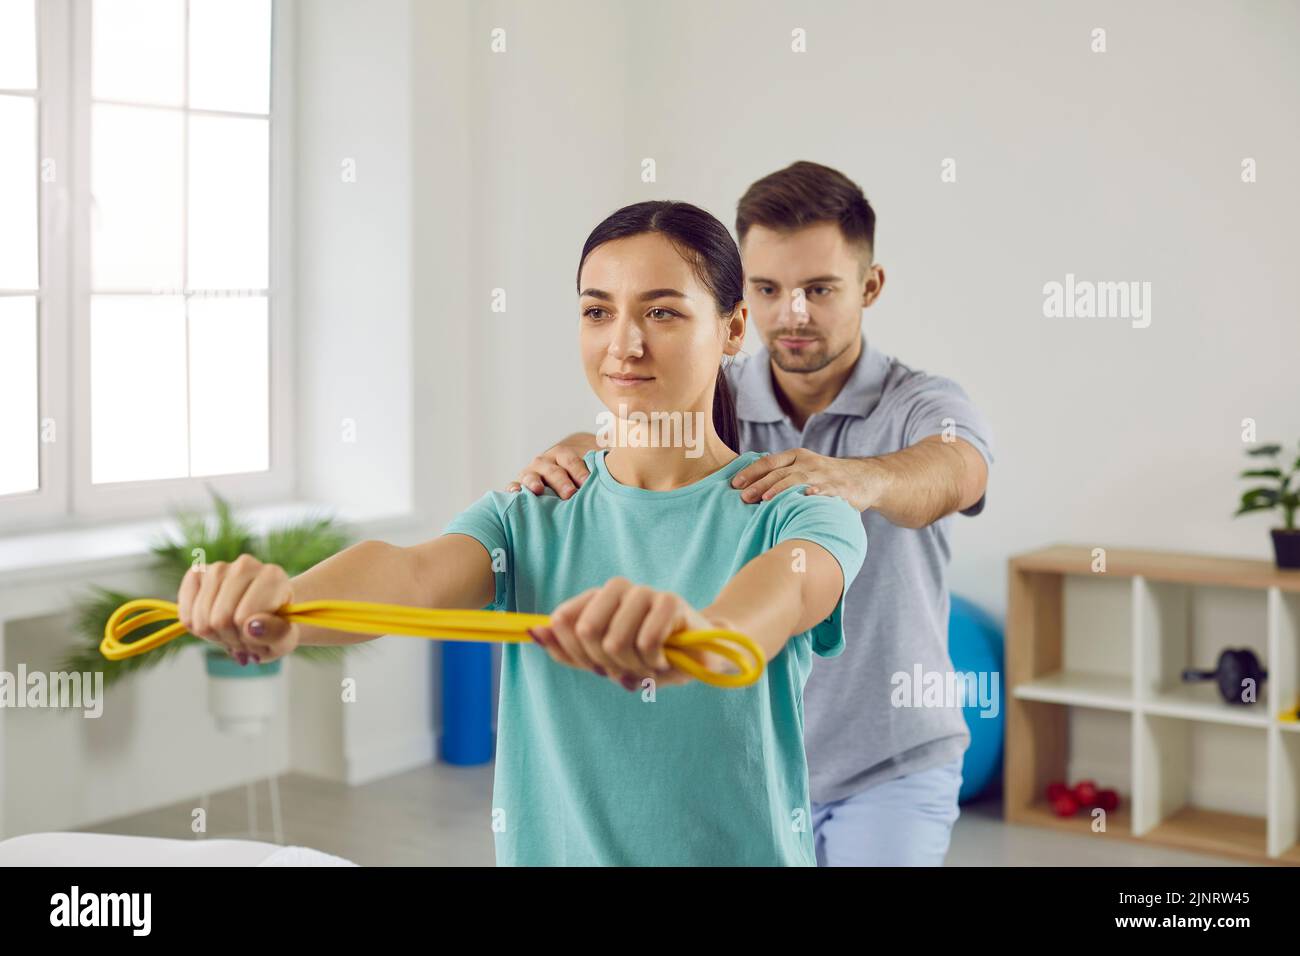 Physiotherapist help female patient recover Stock Photo